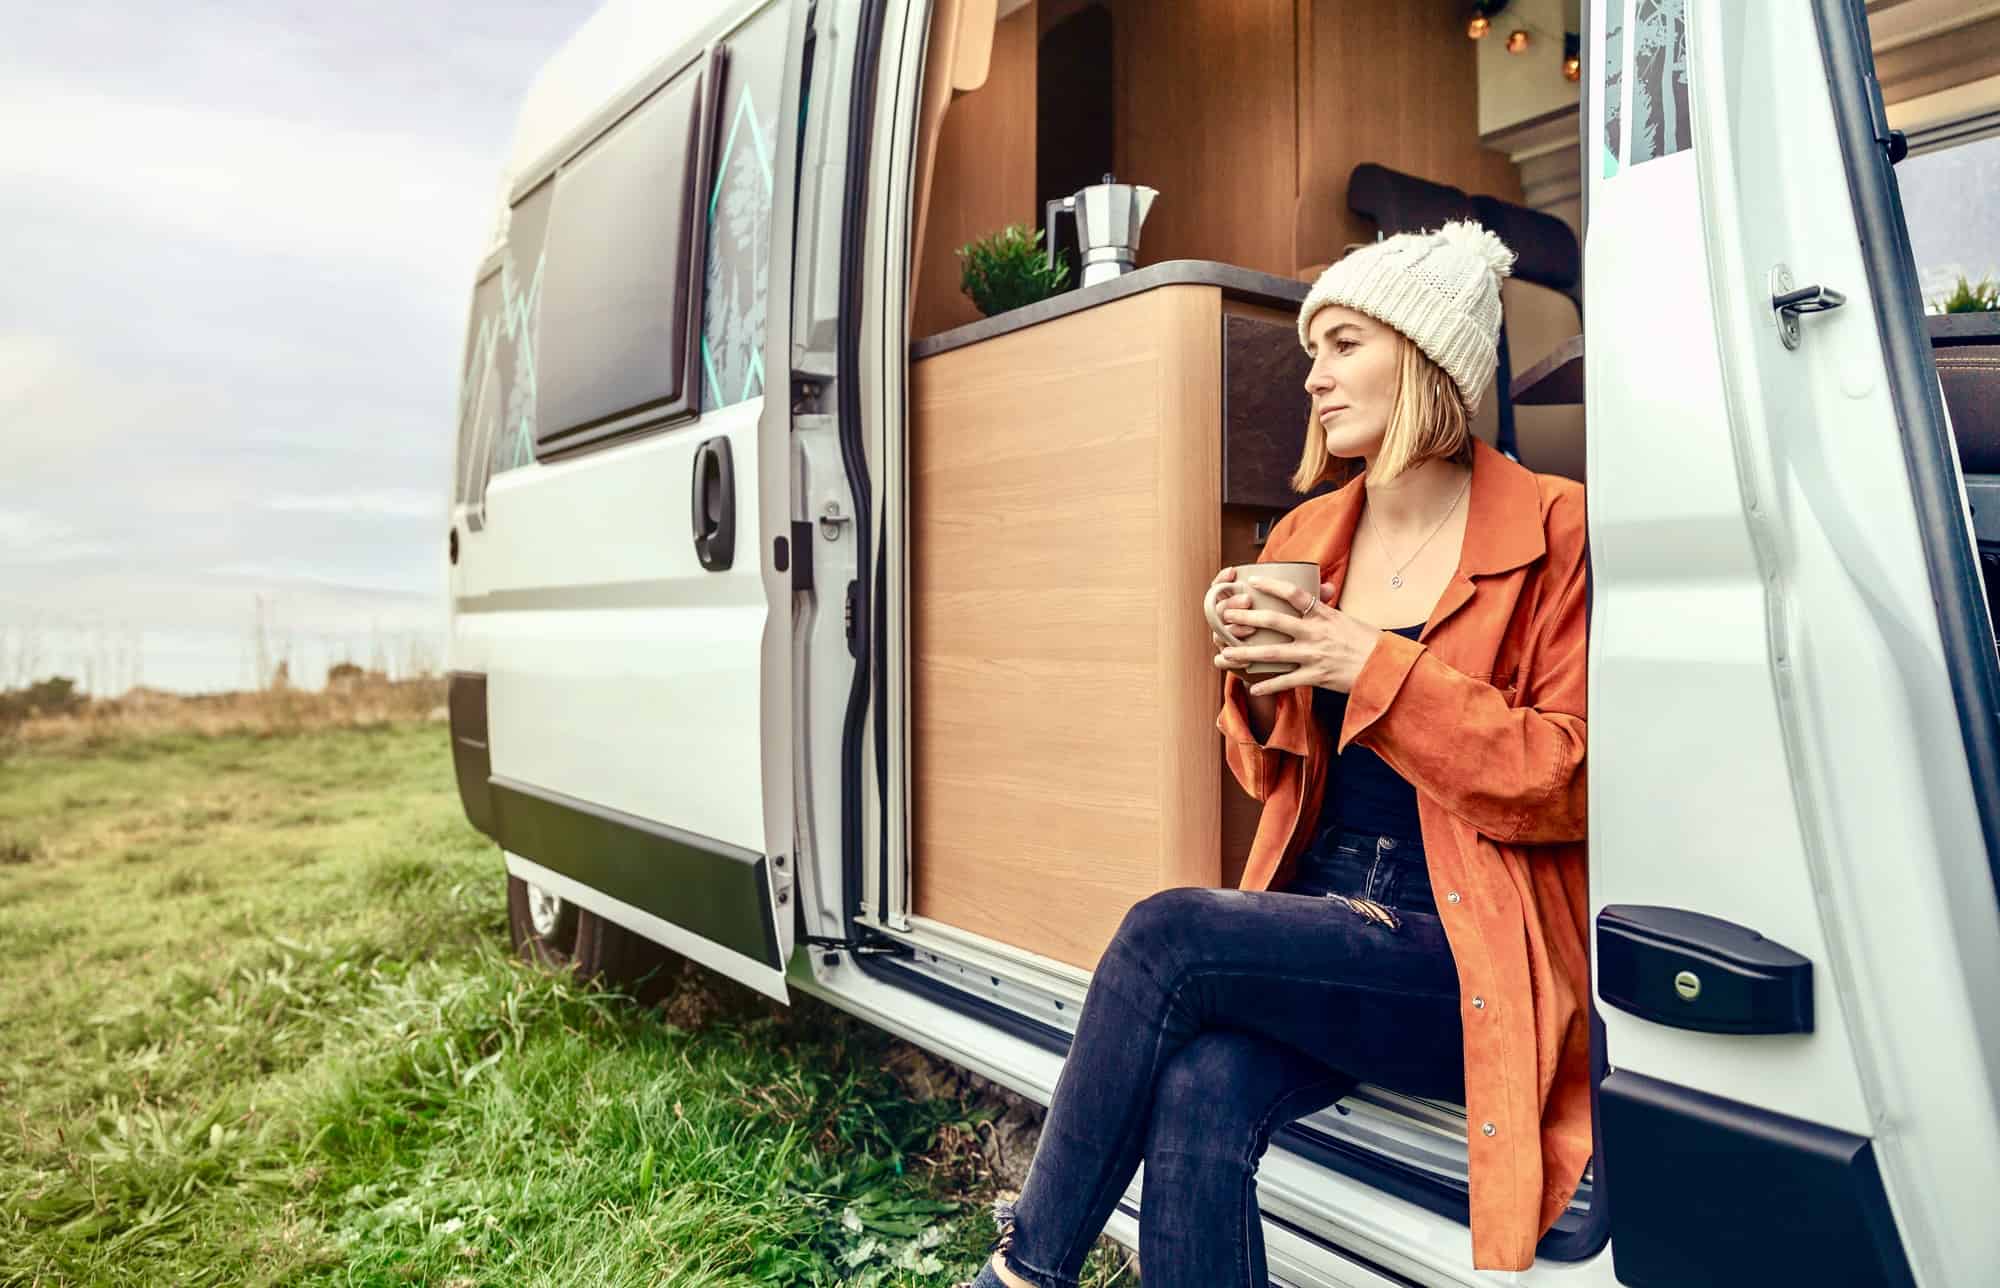 solo female vanlife tips and tips for security and safety